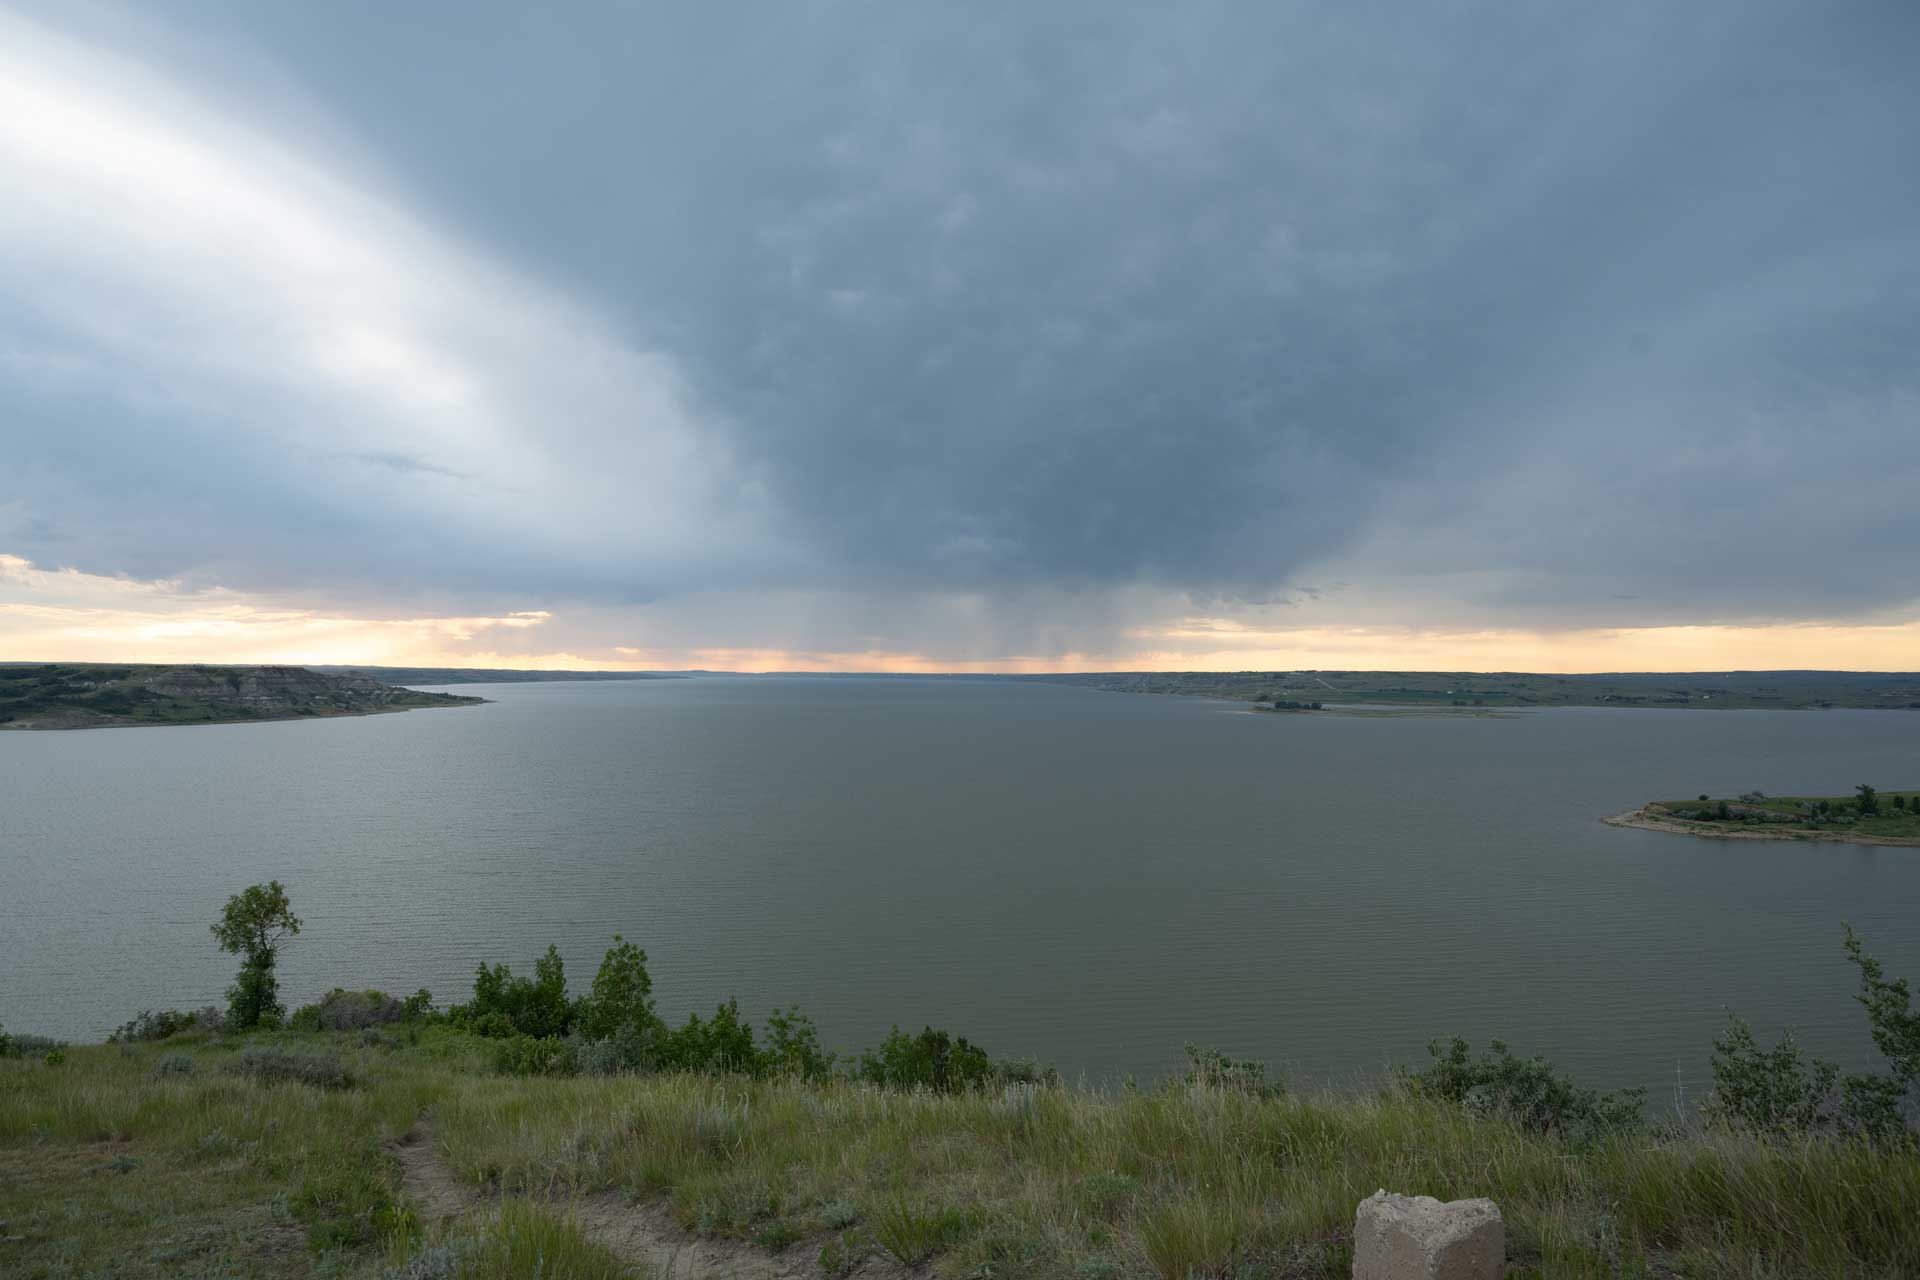 The creation of the Garrison Dam in 1953, by the U.S. Army Corps of Engineers, flooded most villages on the Fort Berthold Reservation and forced the relocation of 325 families.The dam also created Lake Sakakawea which divides the reservation in half. New Town, ND  (Photo by Nina Berman). 